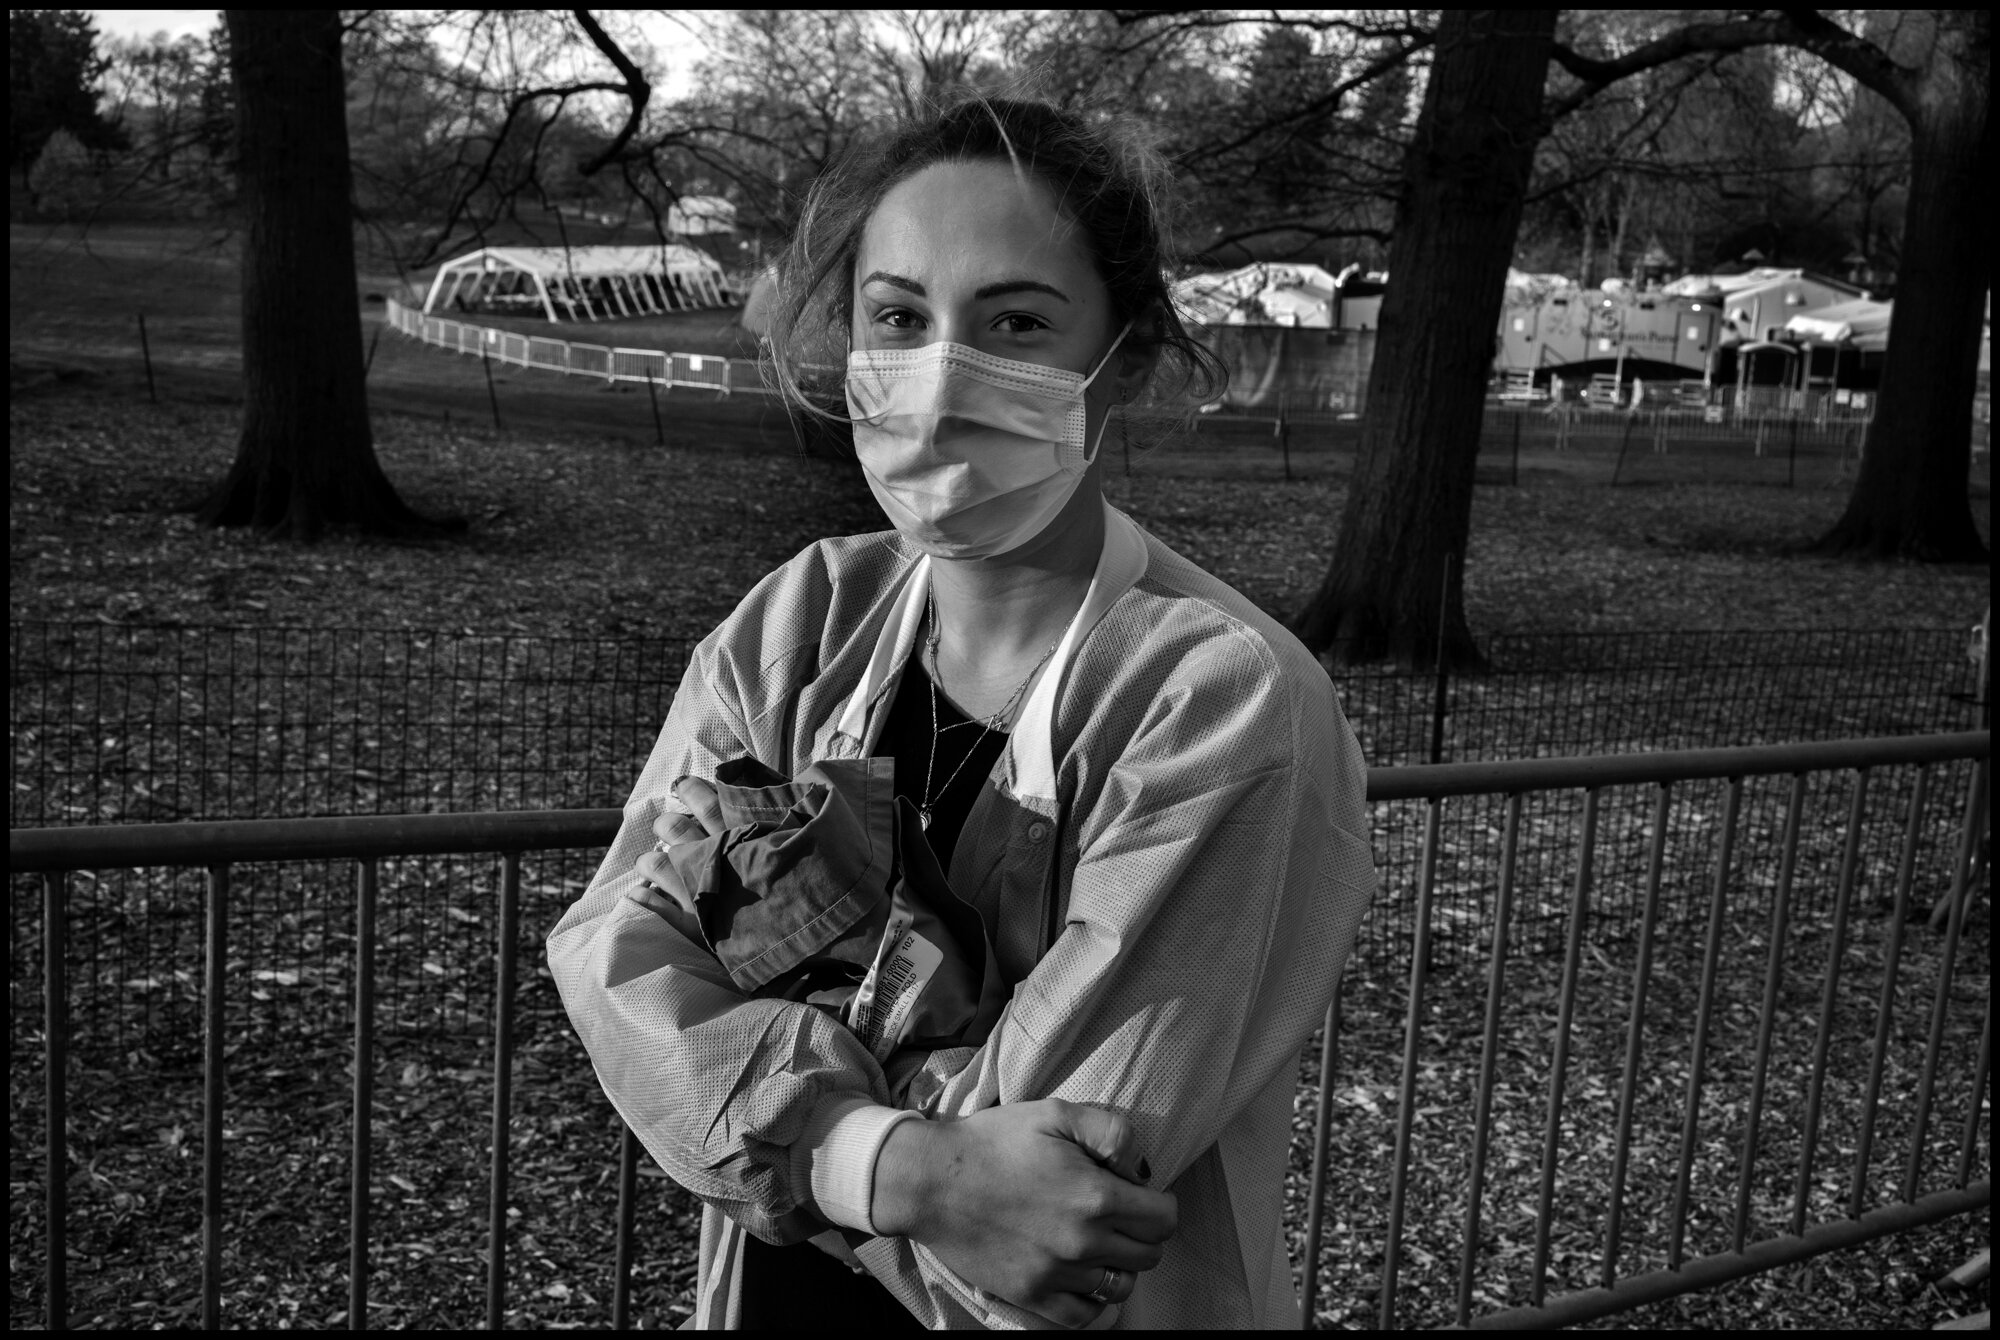  Meredith.   April 16, 2020. © Peter Turnley  ID# 22-014 